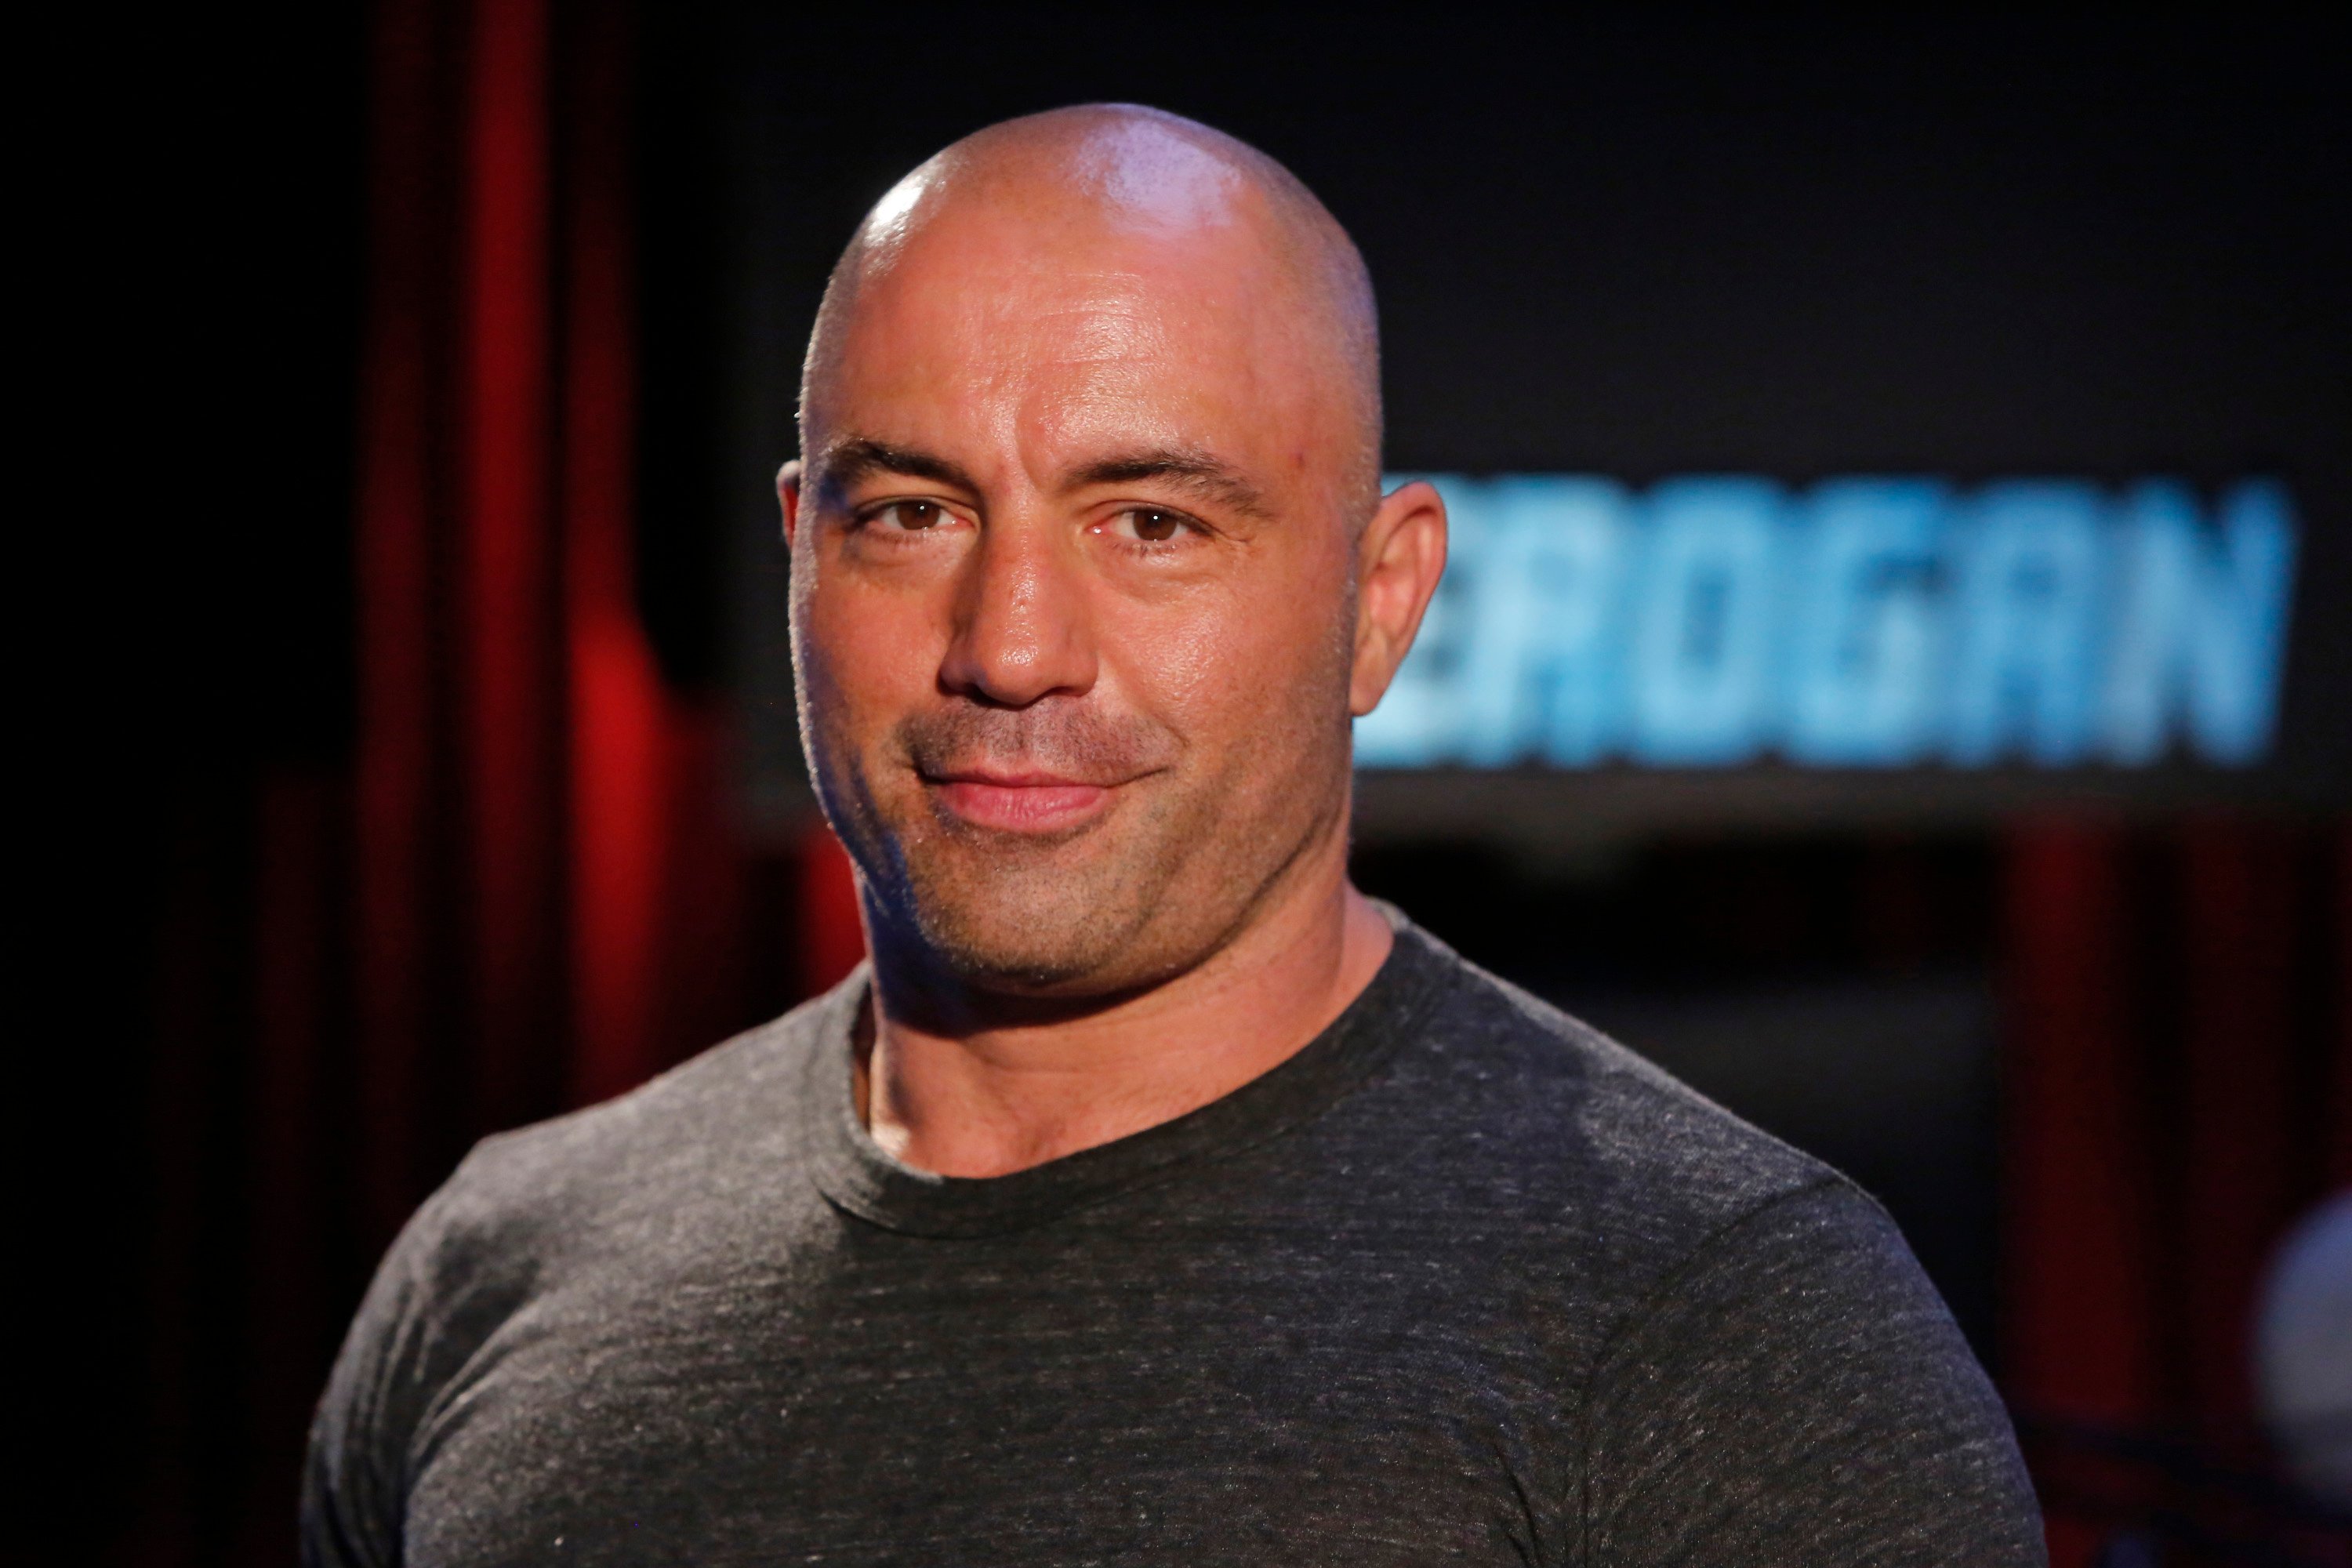 Joe Rogan is as Excited About Bitcoin as Ever